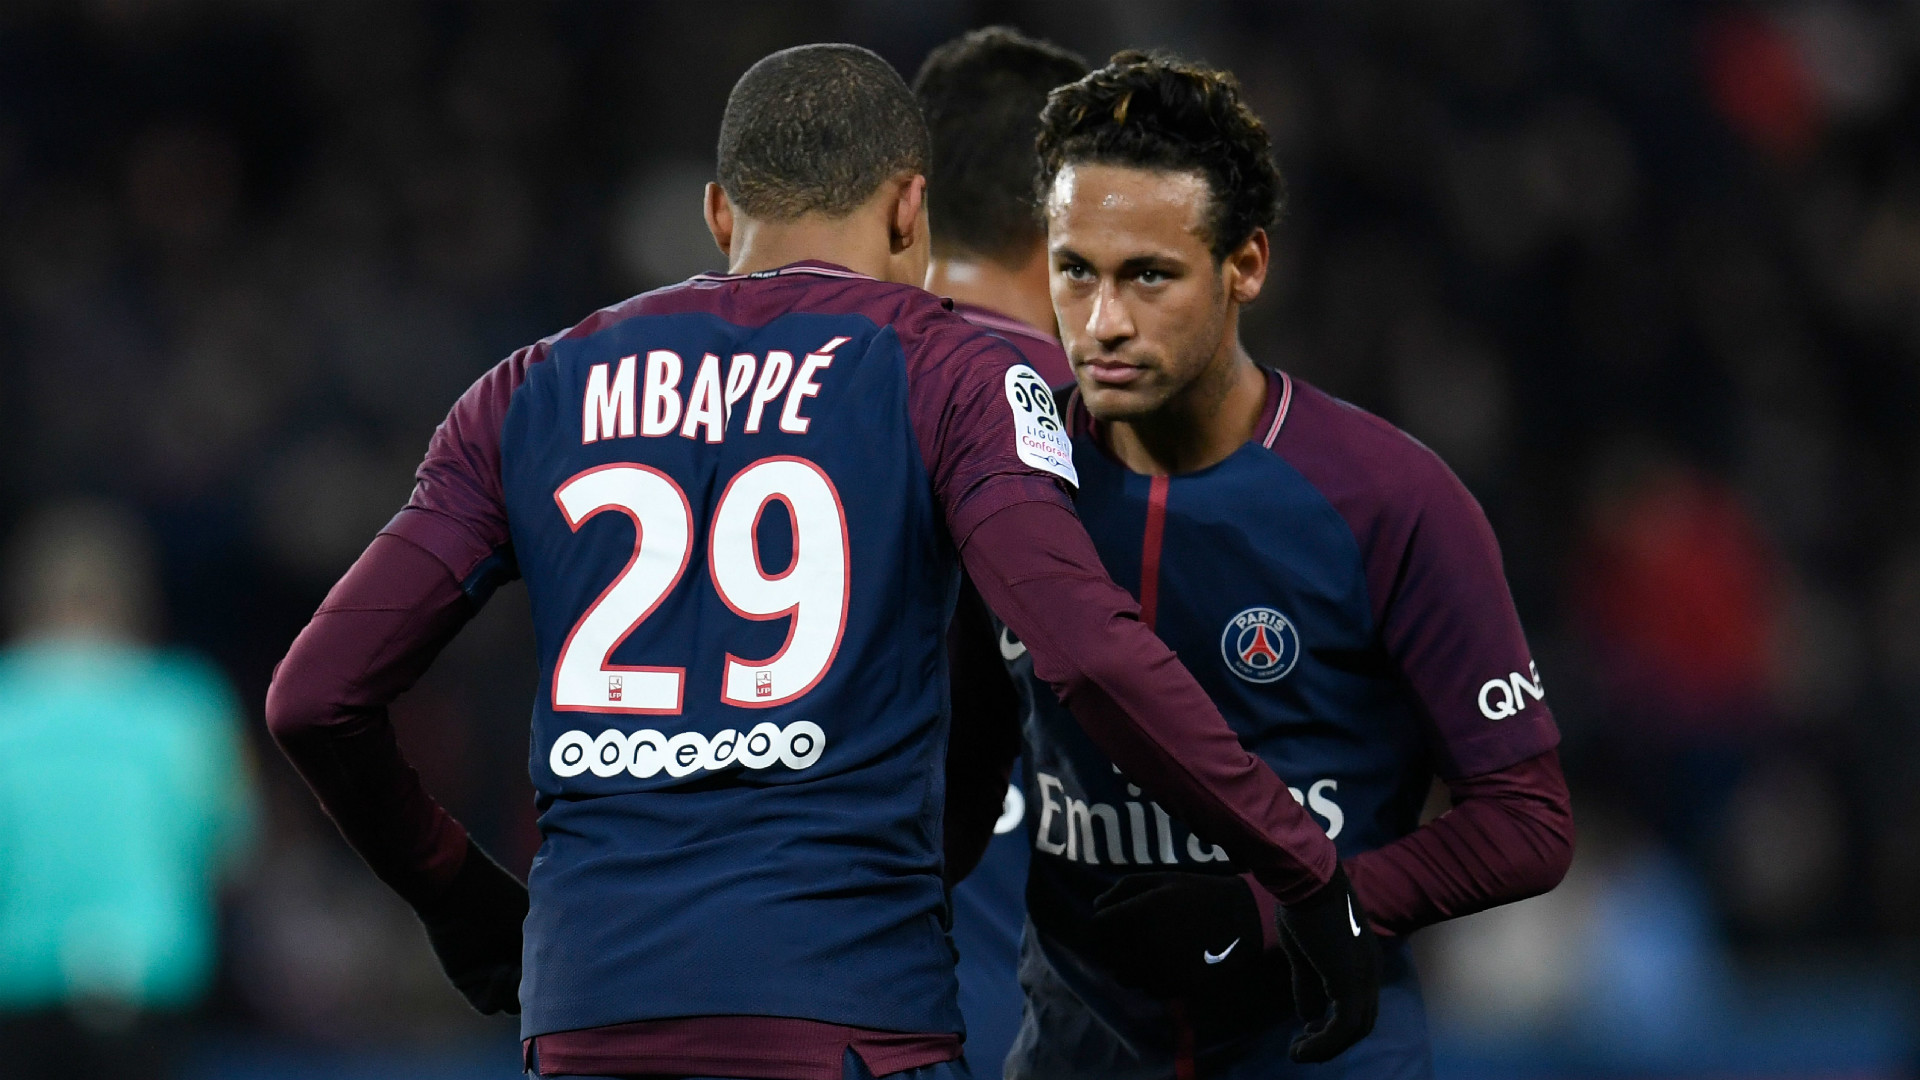 Neymar and Mbappe in doubt for PSGs clash with Guingamp